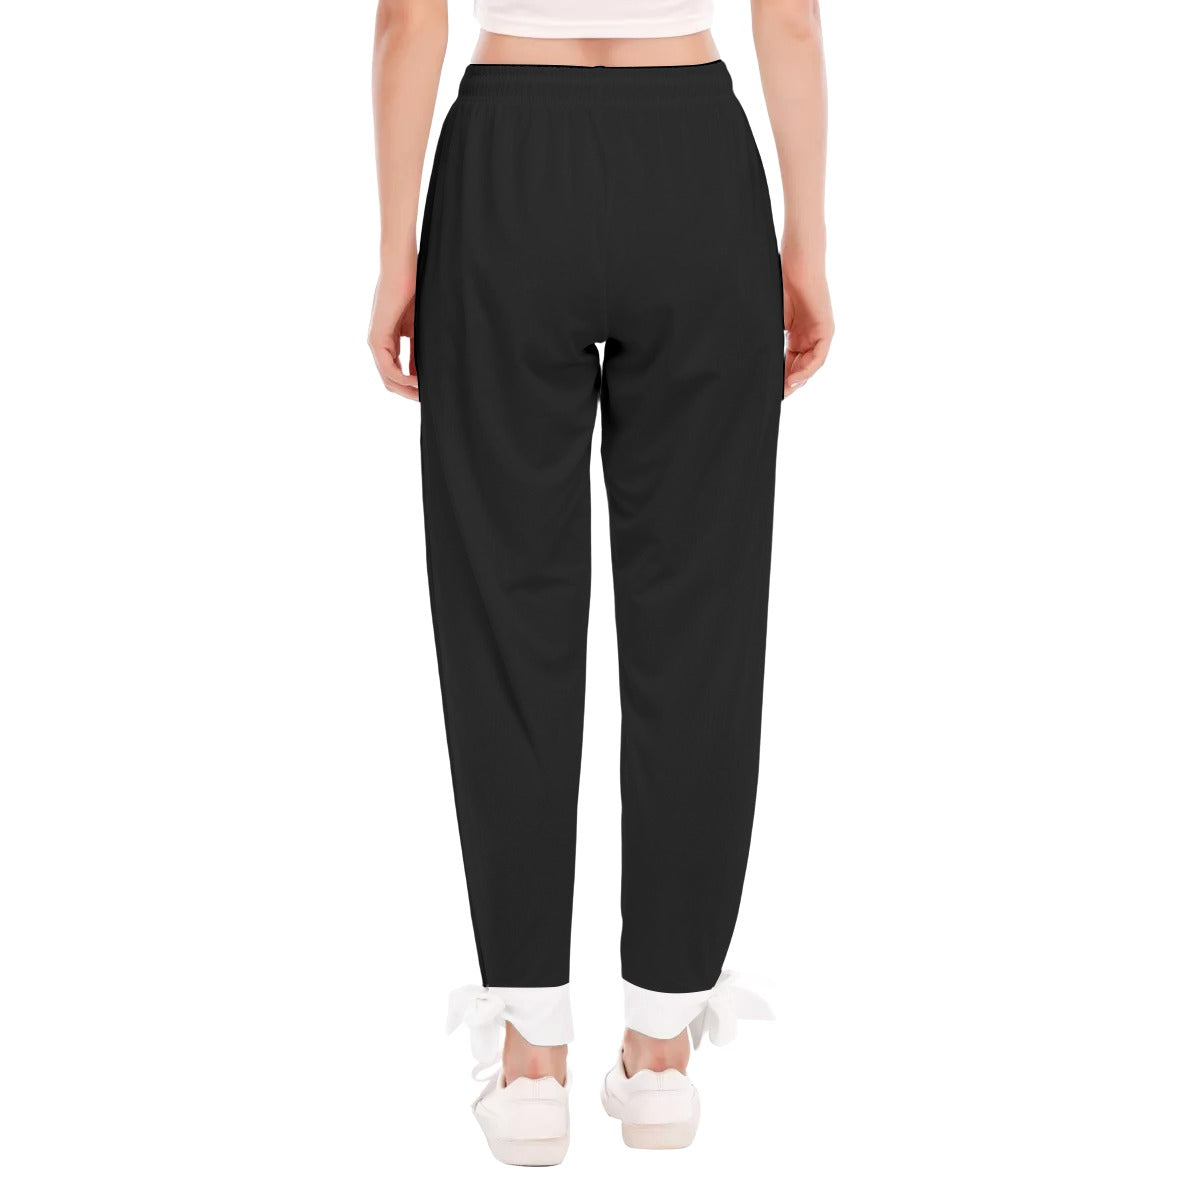 Stylish Loose Yoga Pants for Teen - Personal Hour for Yoga and Meditations 